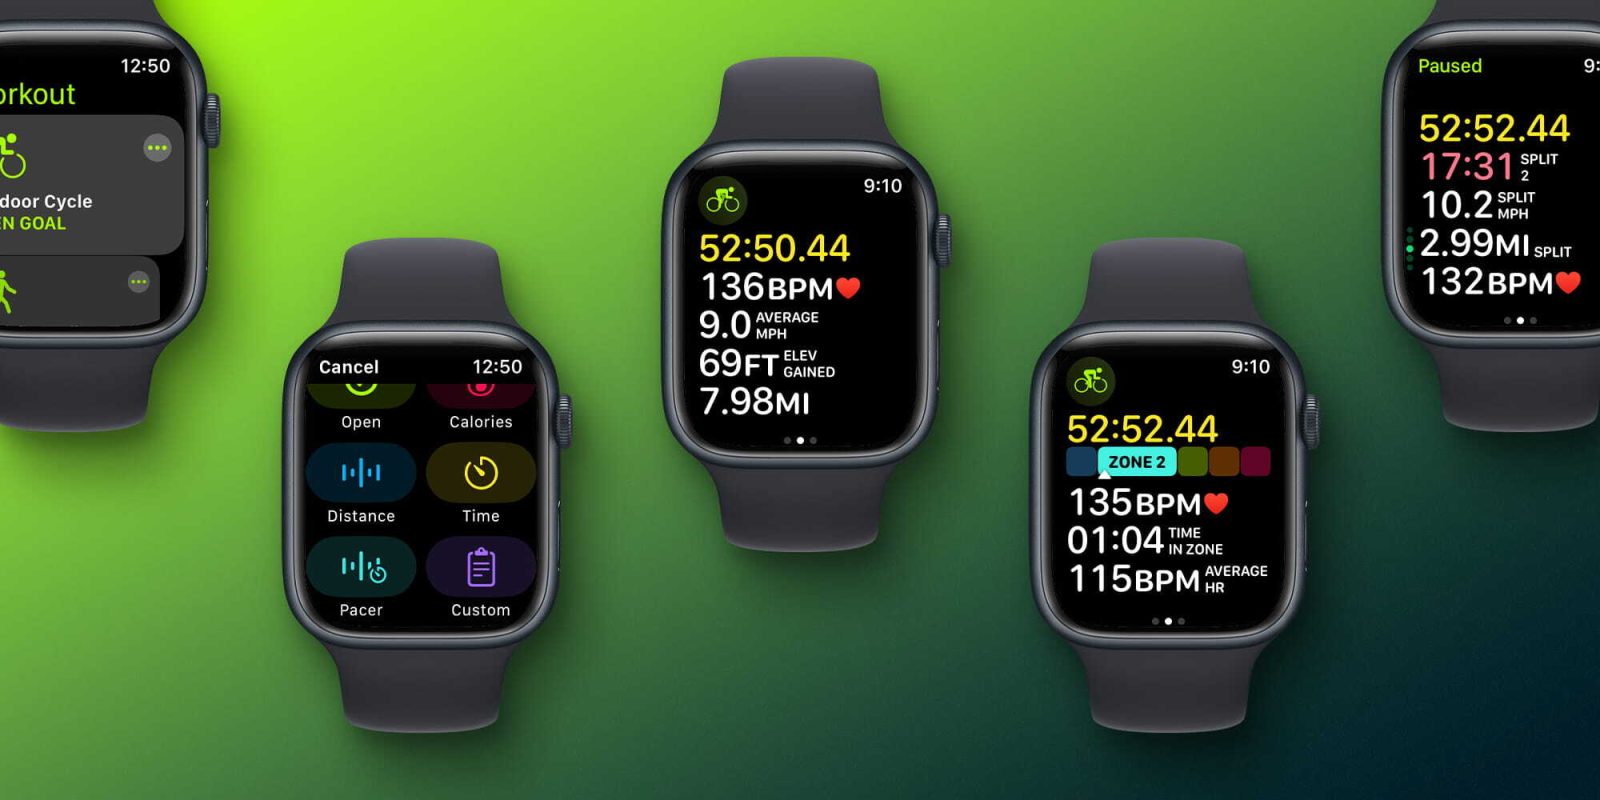 Apple Watch cycling metrics: Hands-on with new Workout features in watchOS 9